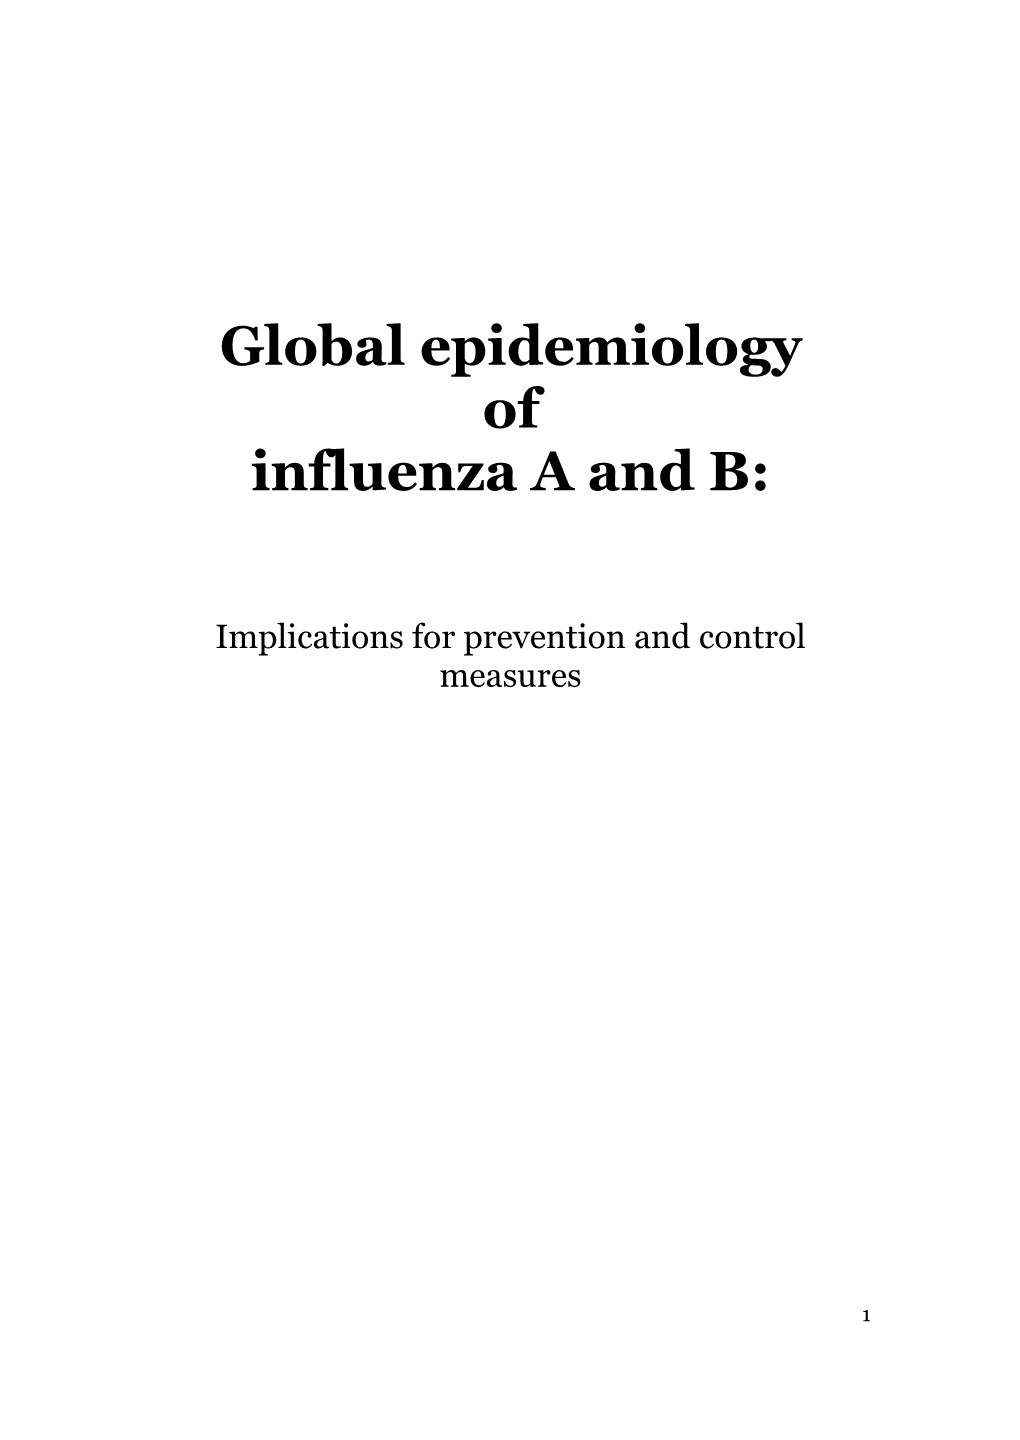 Global Epidemiology of Influenza a and B